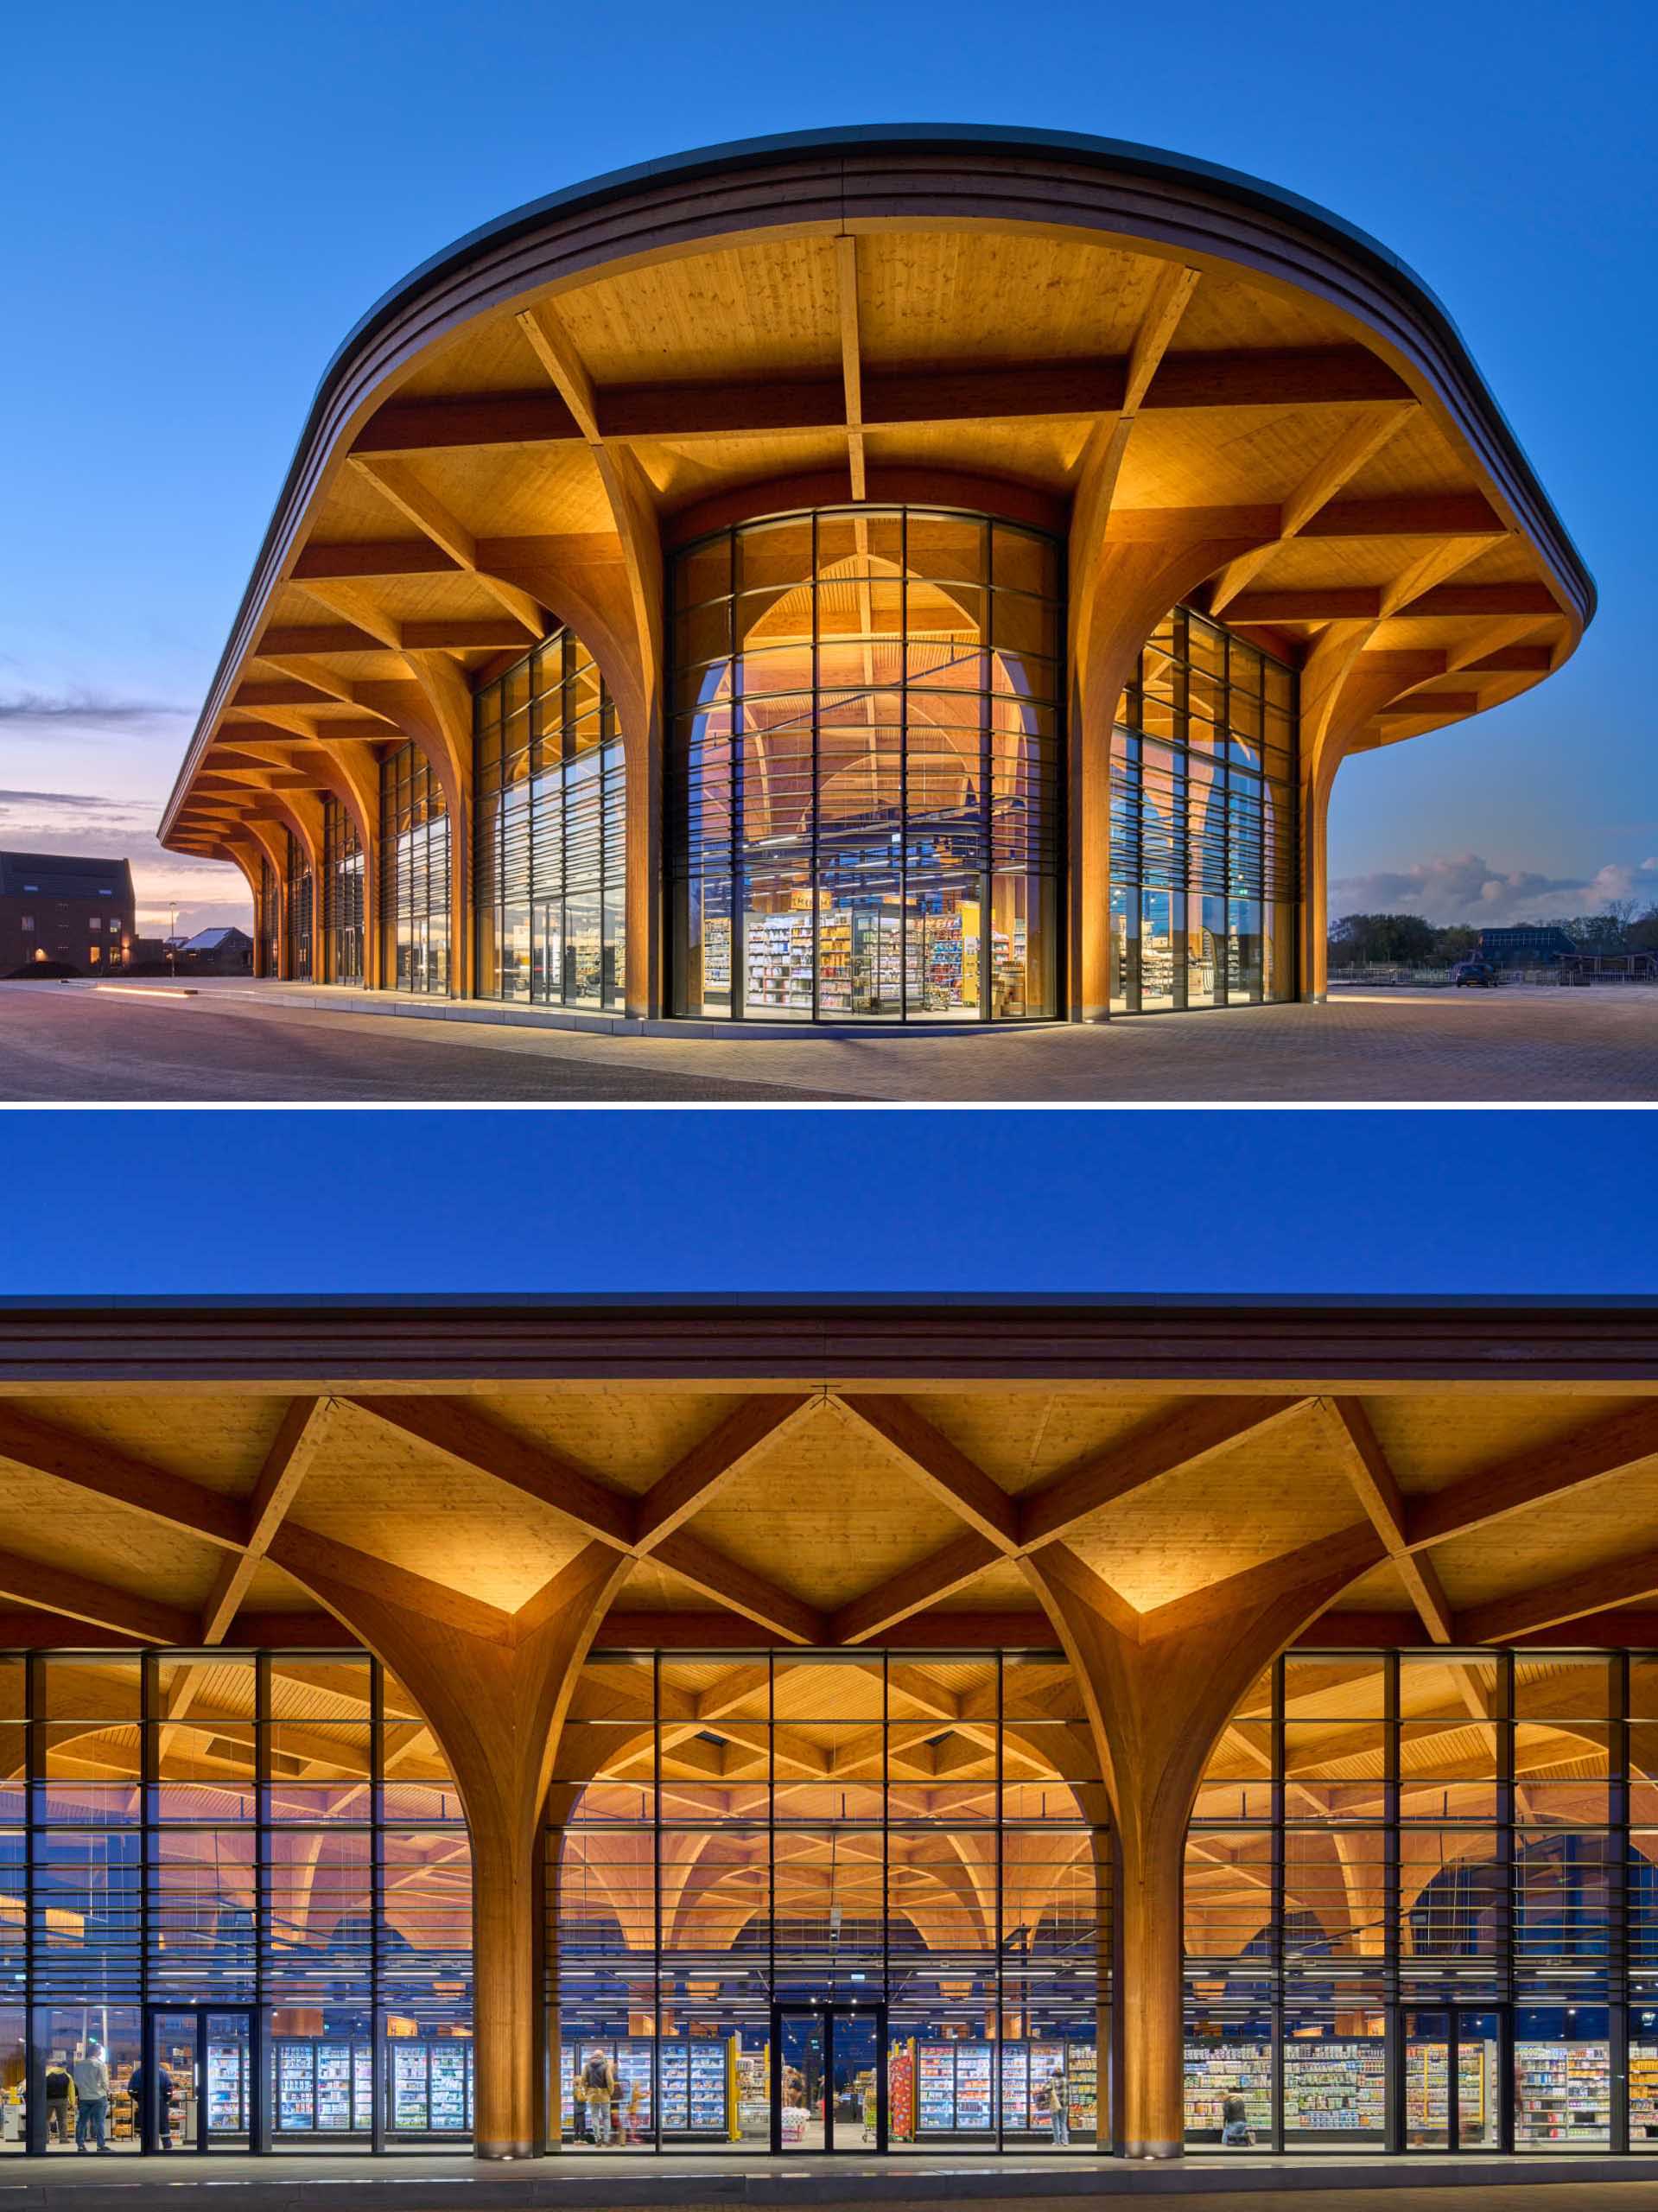 A modern supermarket with an exposed wood structure with a cathedral-like appearance.